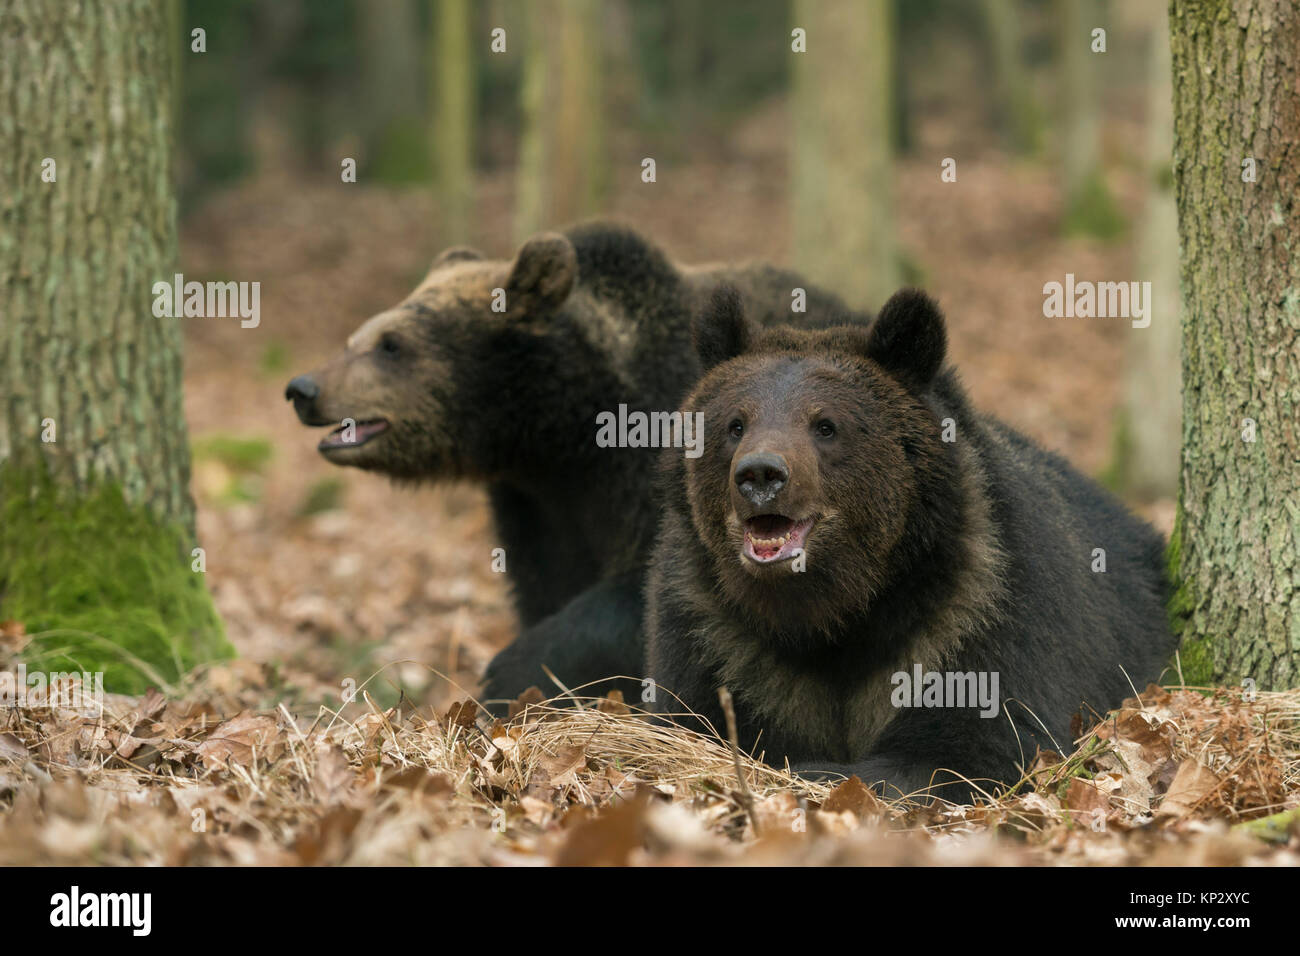 Brown Bears / Braunbaeren ( Ursus arctos ), two siblings, young, adolescent, lying, playing together in an autumnal broadleaf forest, Europe. Stock Photo